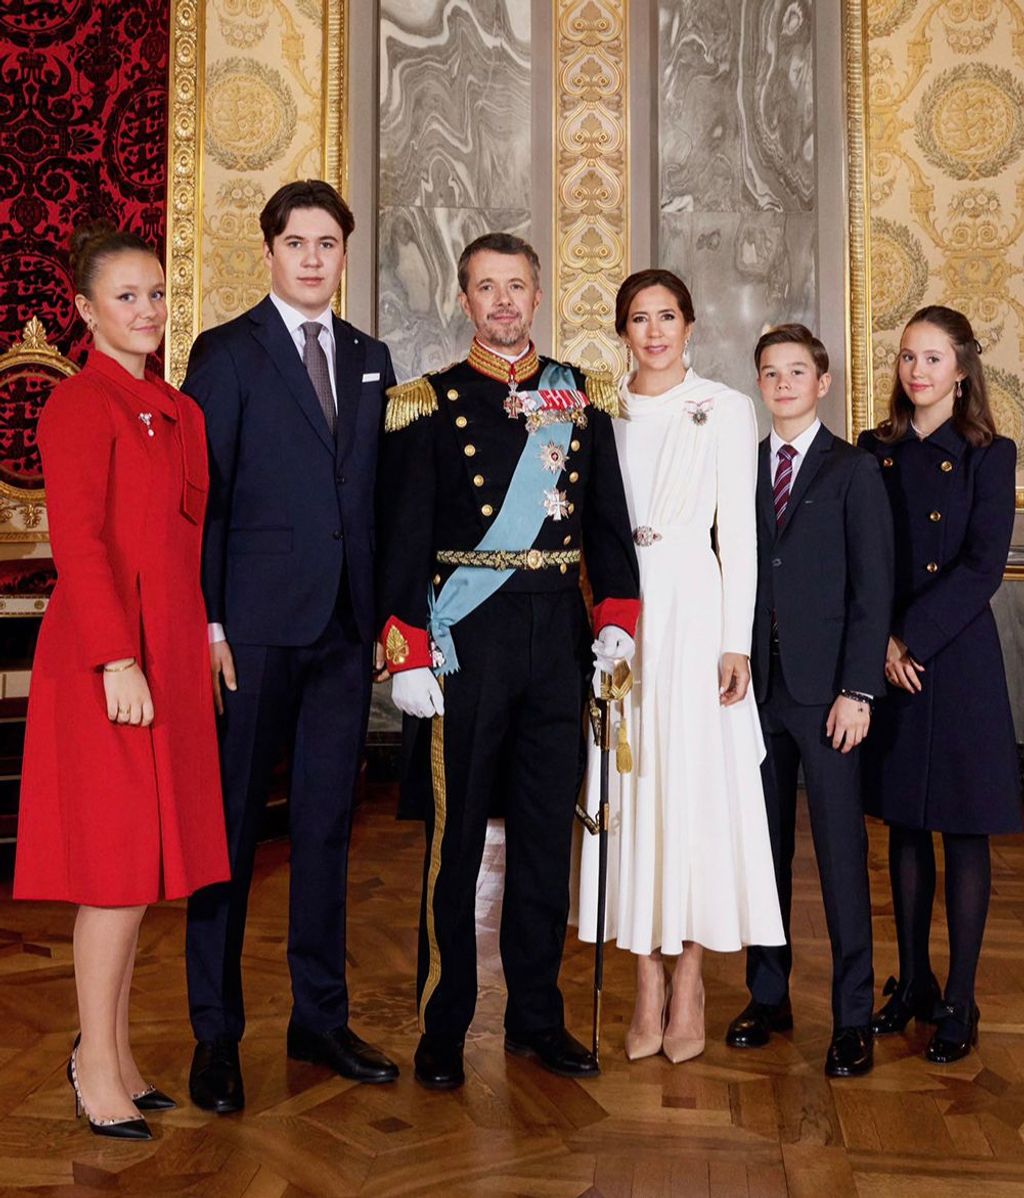 King Frederik X of Denmark with Queen Mary during official portrait